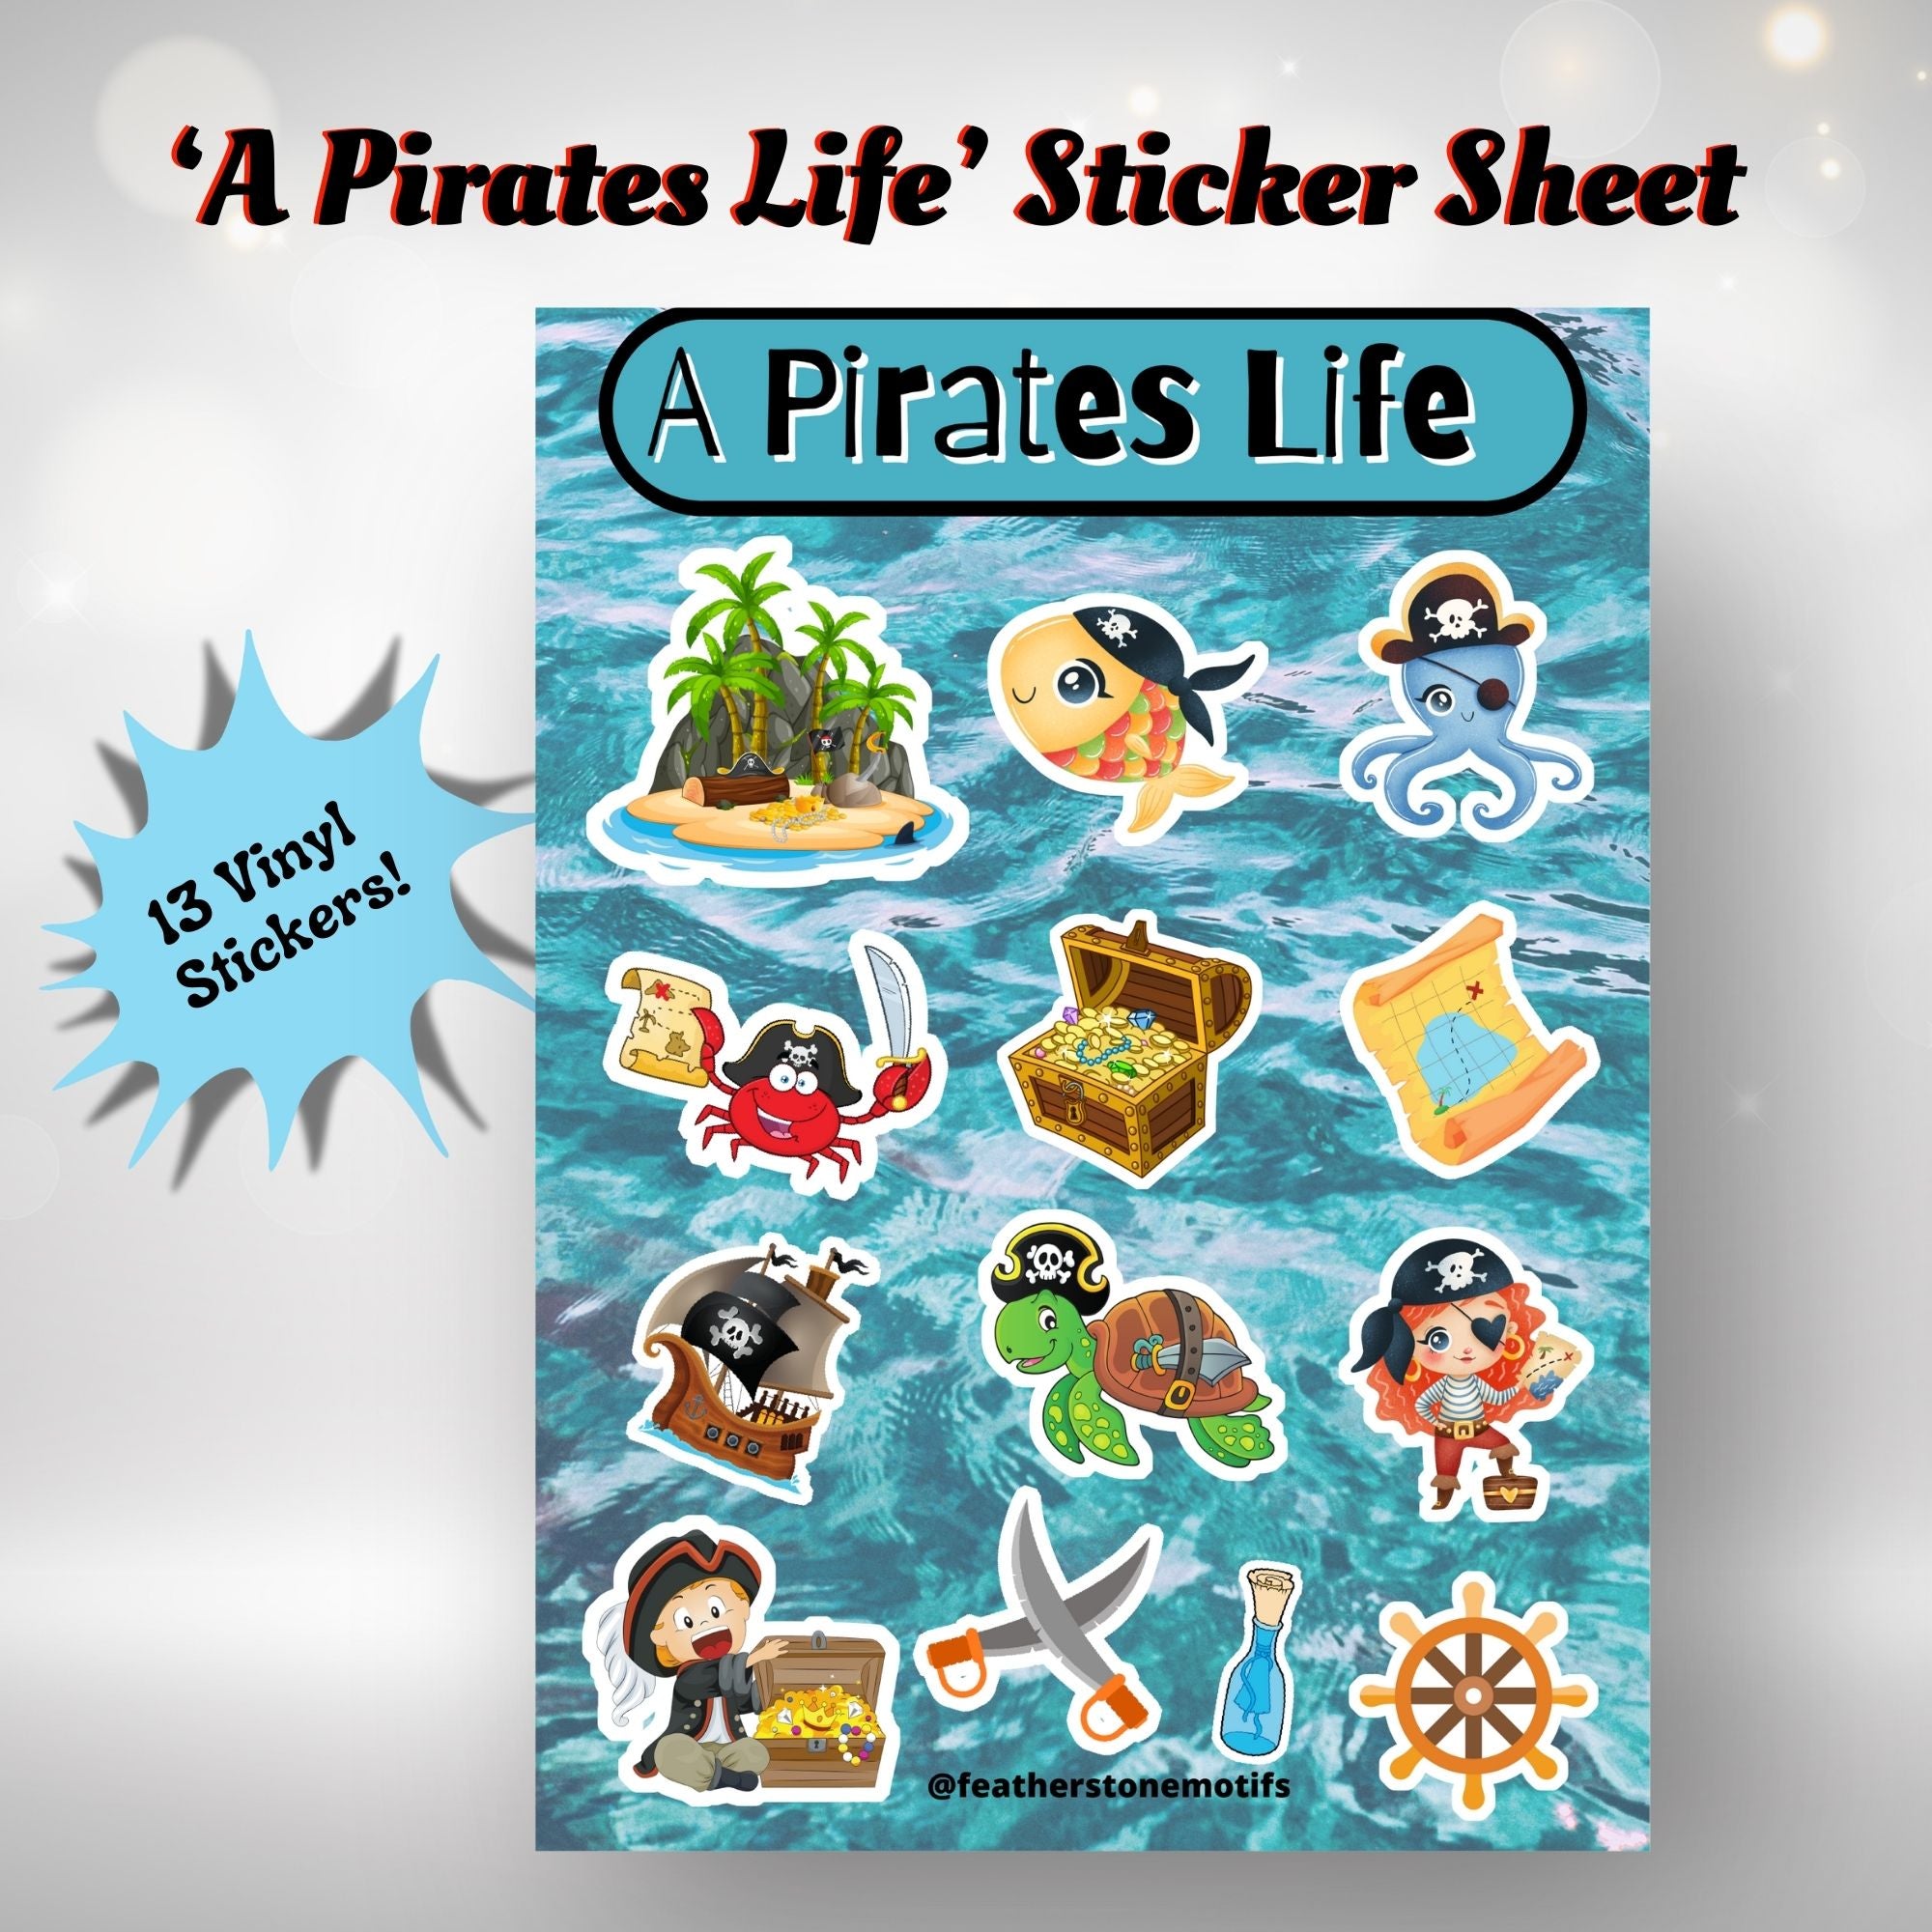 This image shows the Pirate's Life sticker sheet with 13 vinyl stickers that is included in the Pirate themed Camp Postcard Kit.